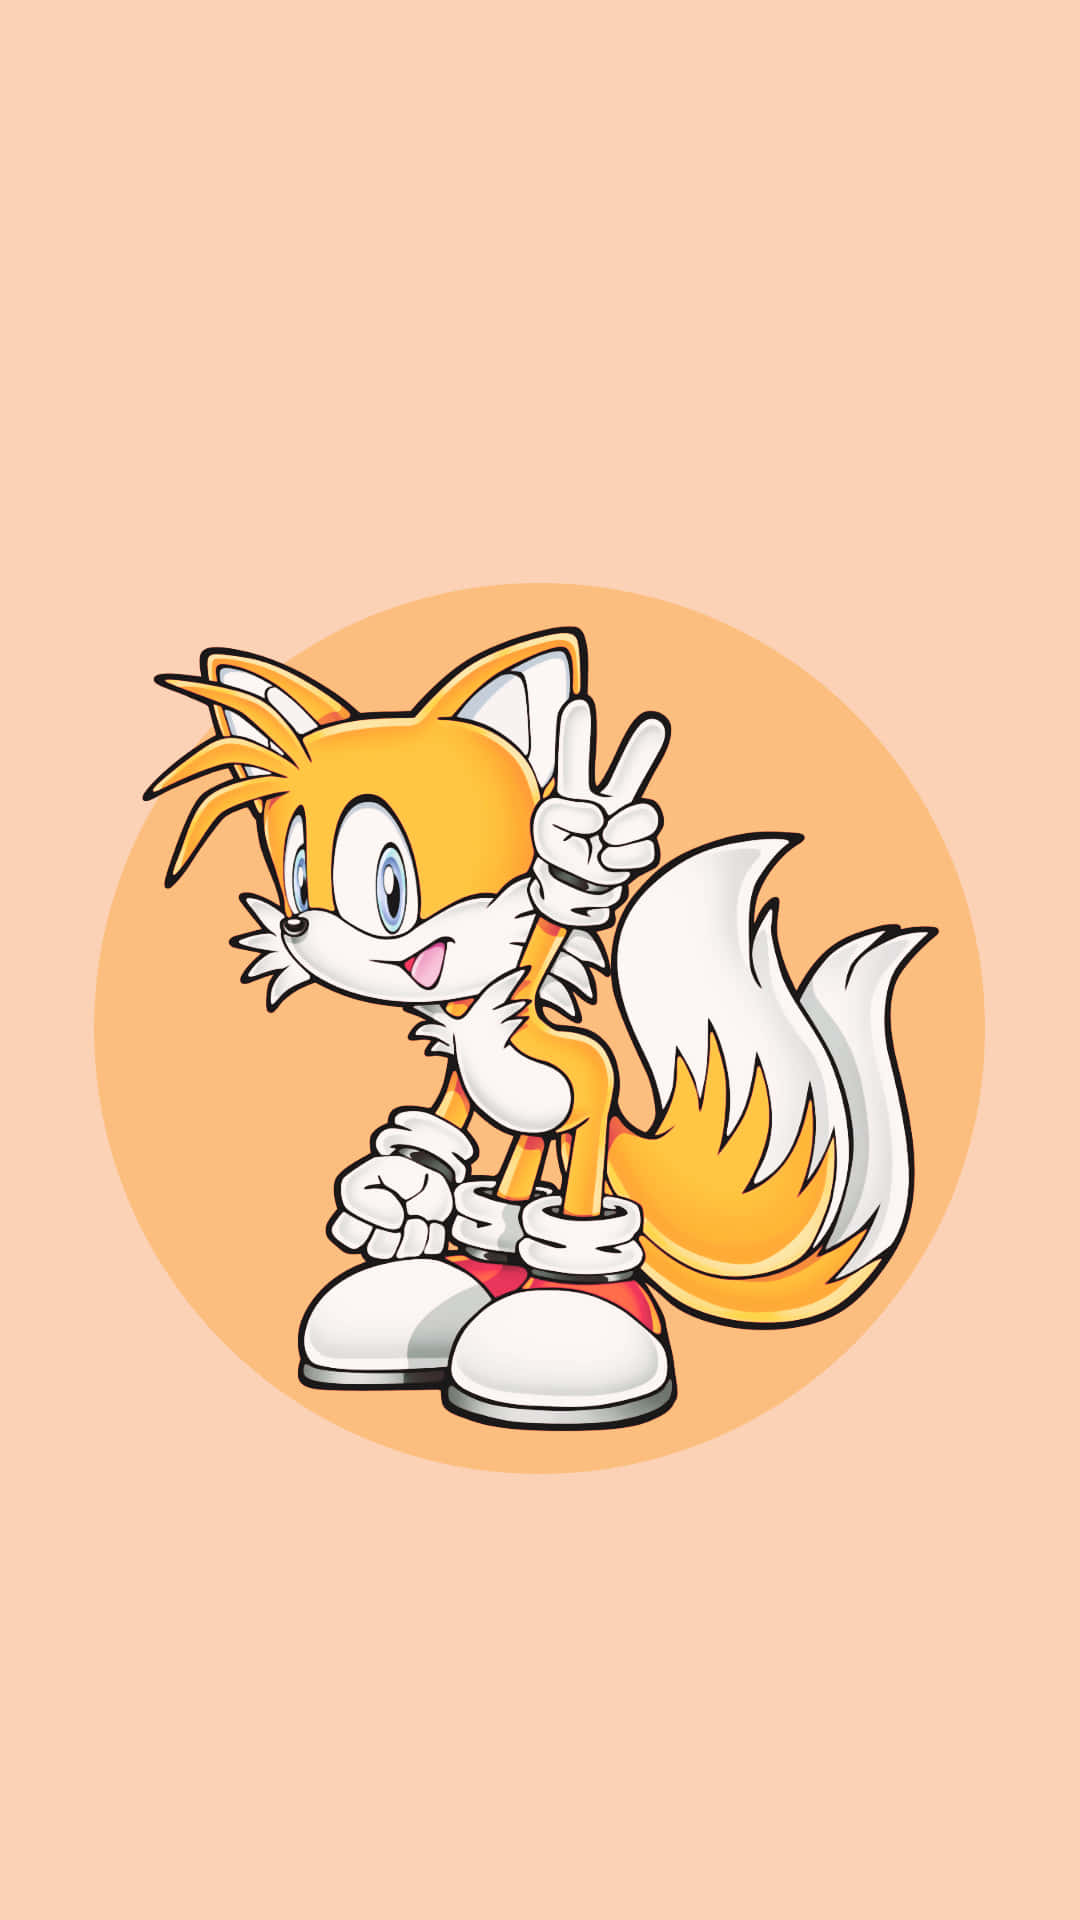 Miles “tails” Prower, The Faithful Fox Sidekick Of Sonic The Hedgehog Background